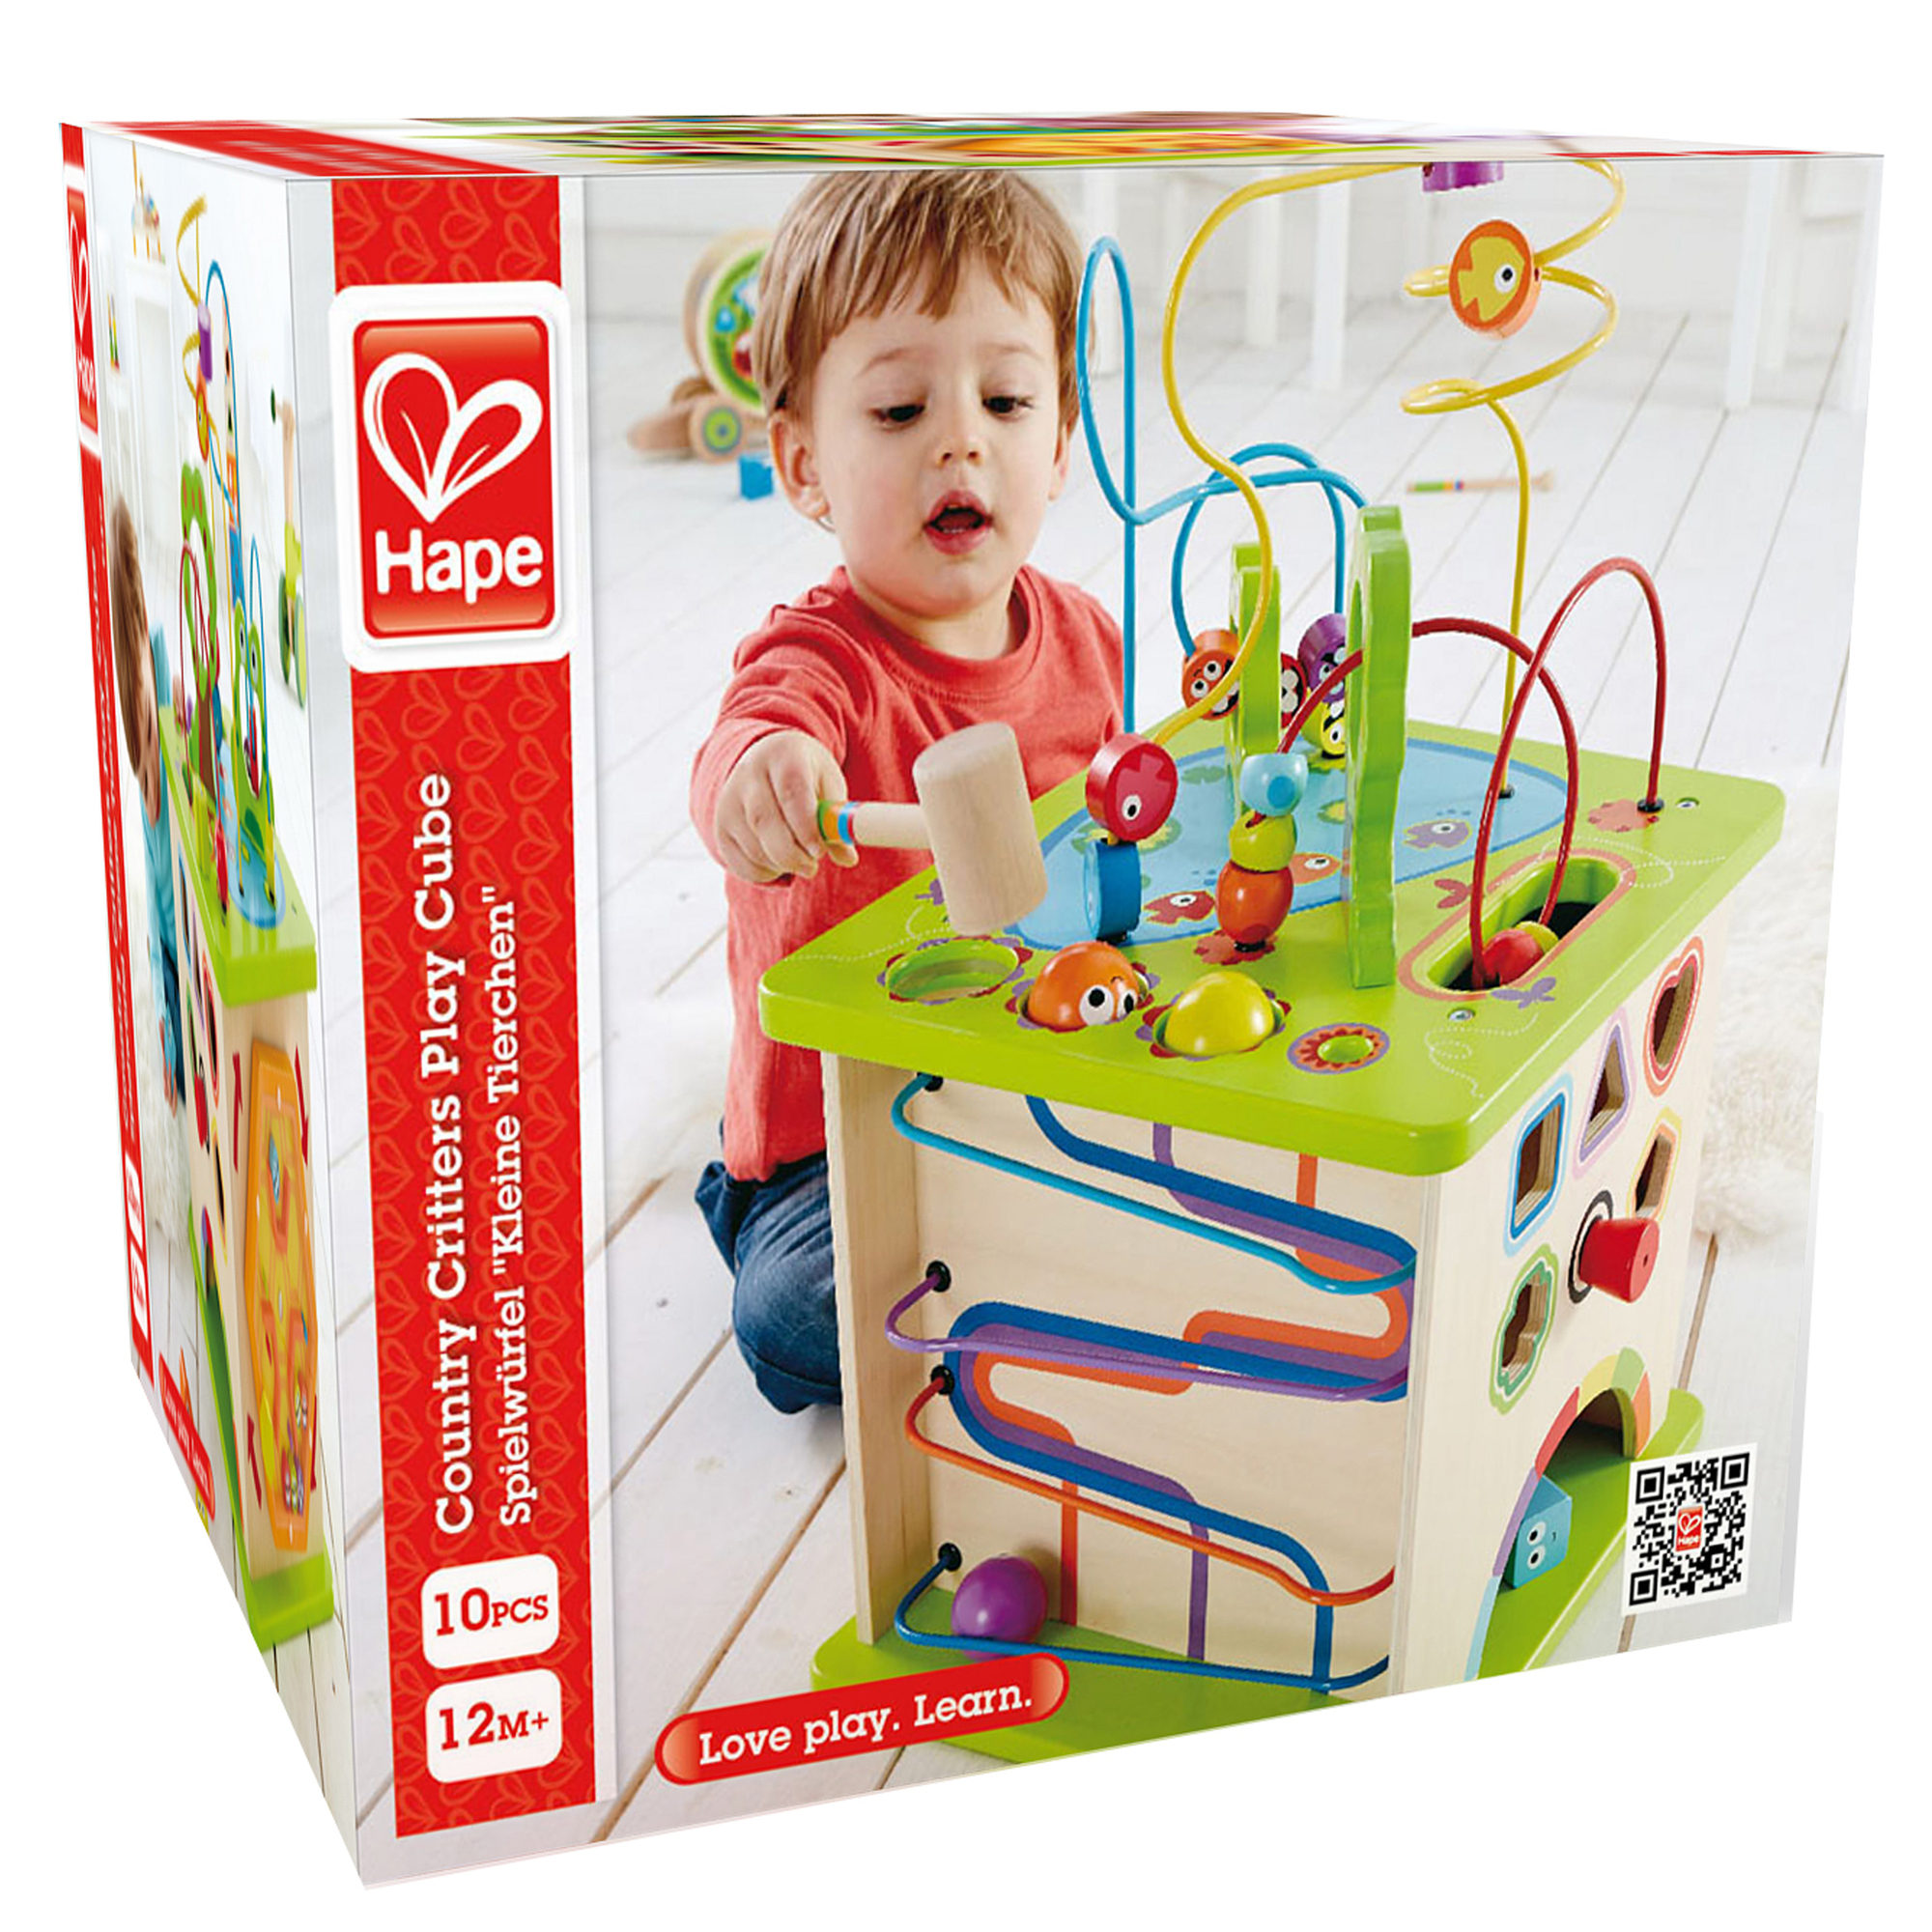 Hape Country Critters 5-Sided Wooden Play Cube for Toddlers, Ages 12 mo+ - image 2 of 8